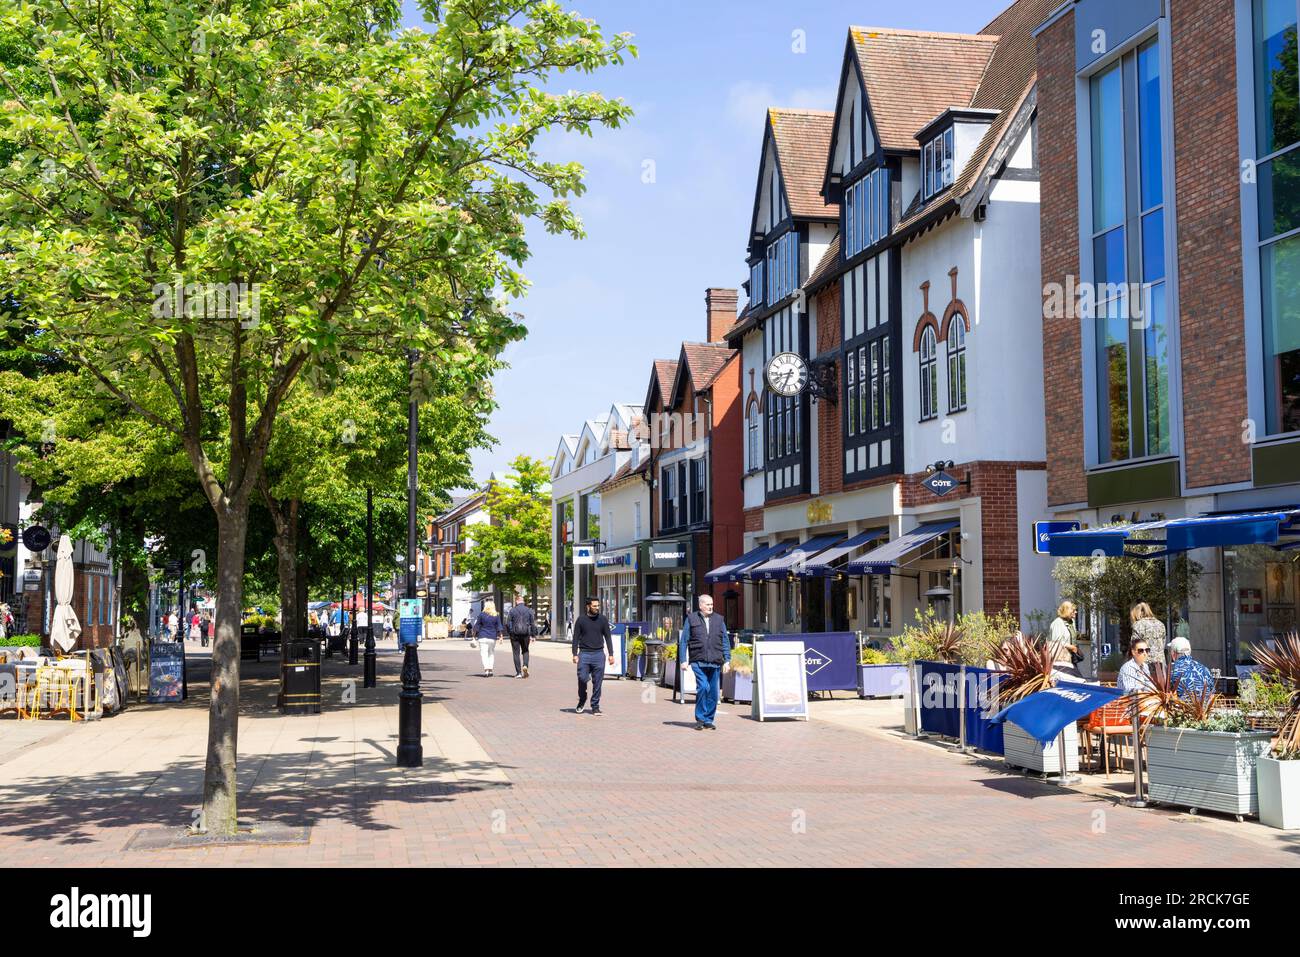 Solihull town centre Carluccios italian restaurant and Cote restaurant Solihull High street Solihull West Midlands England UK GB Europe Stock Photo